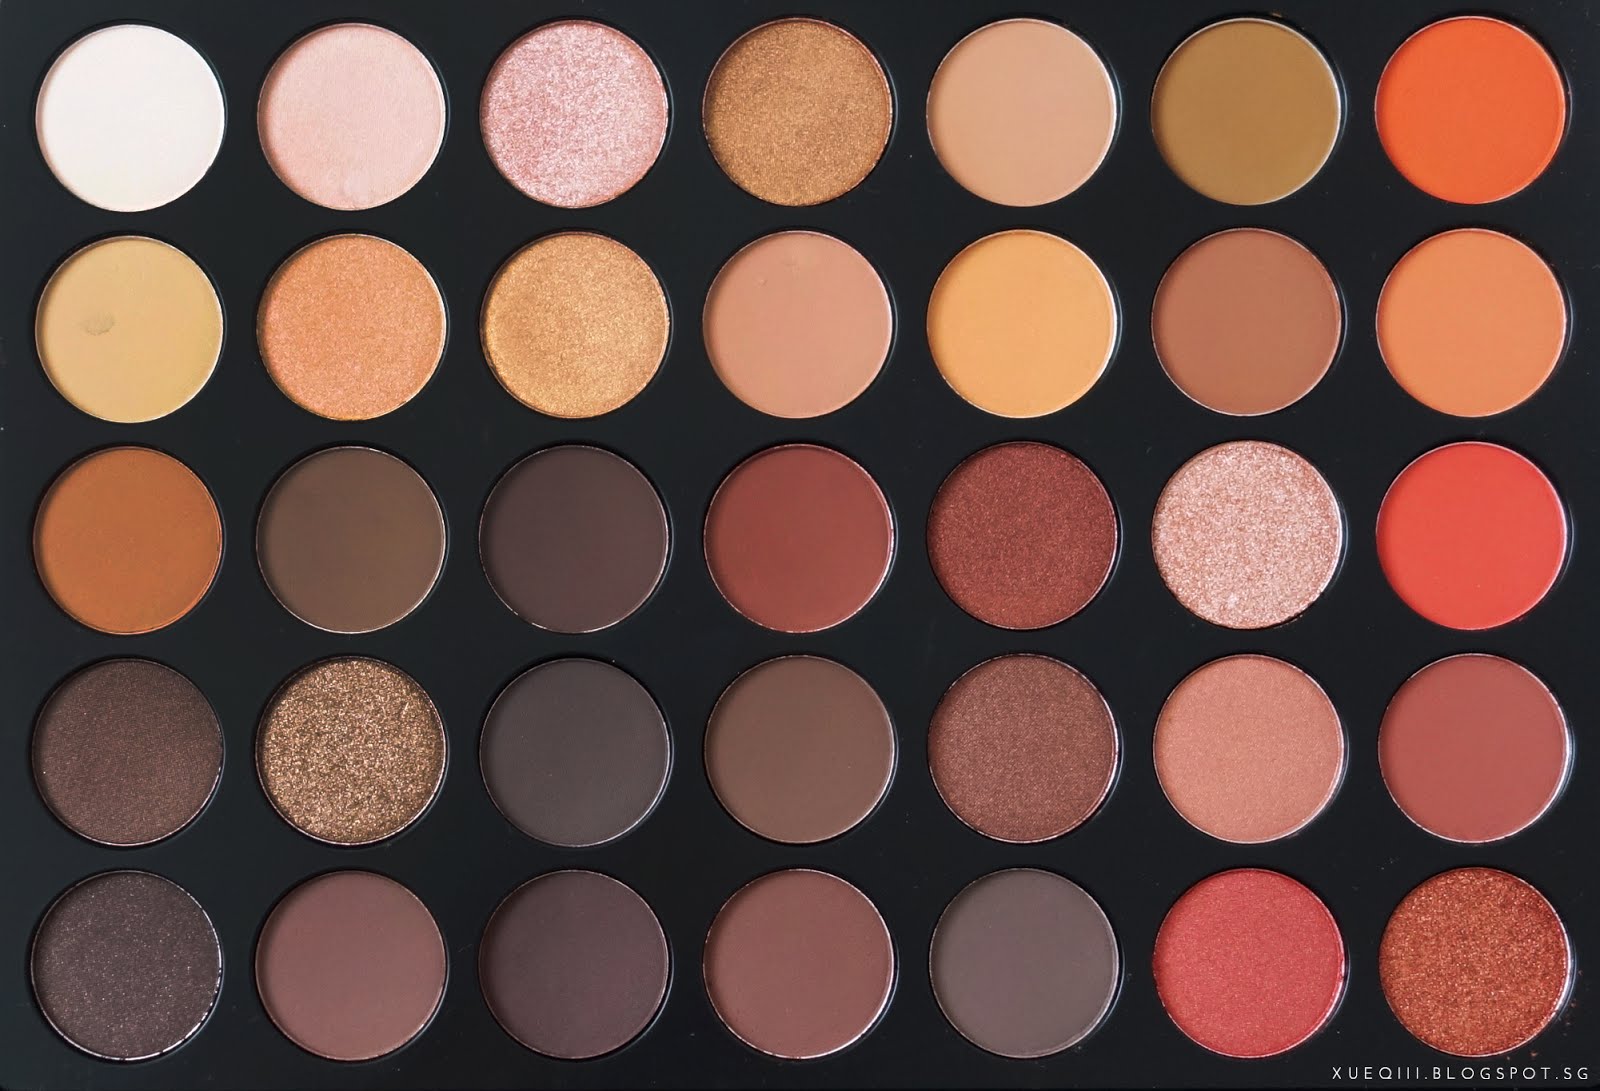 Morphe Brushes 35O Palette Review and Swatches with A